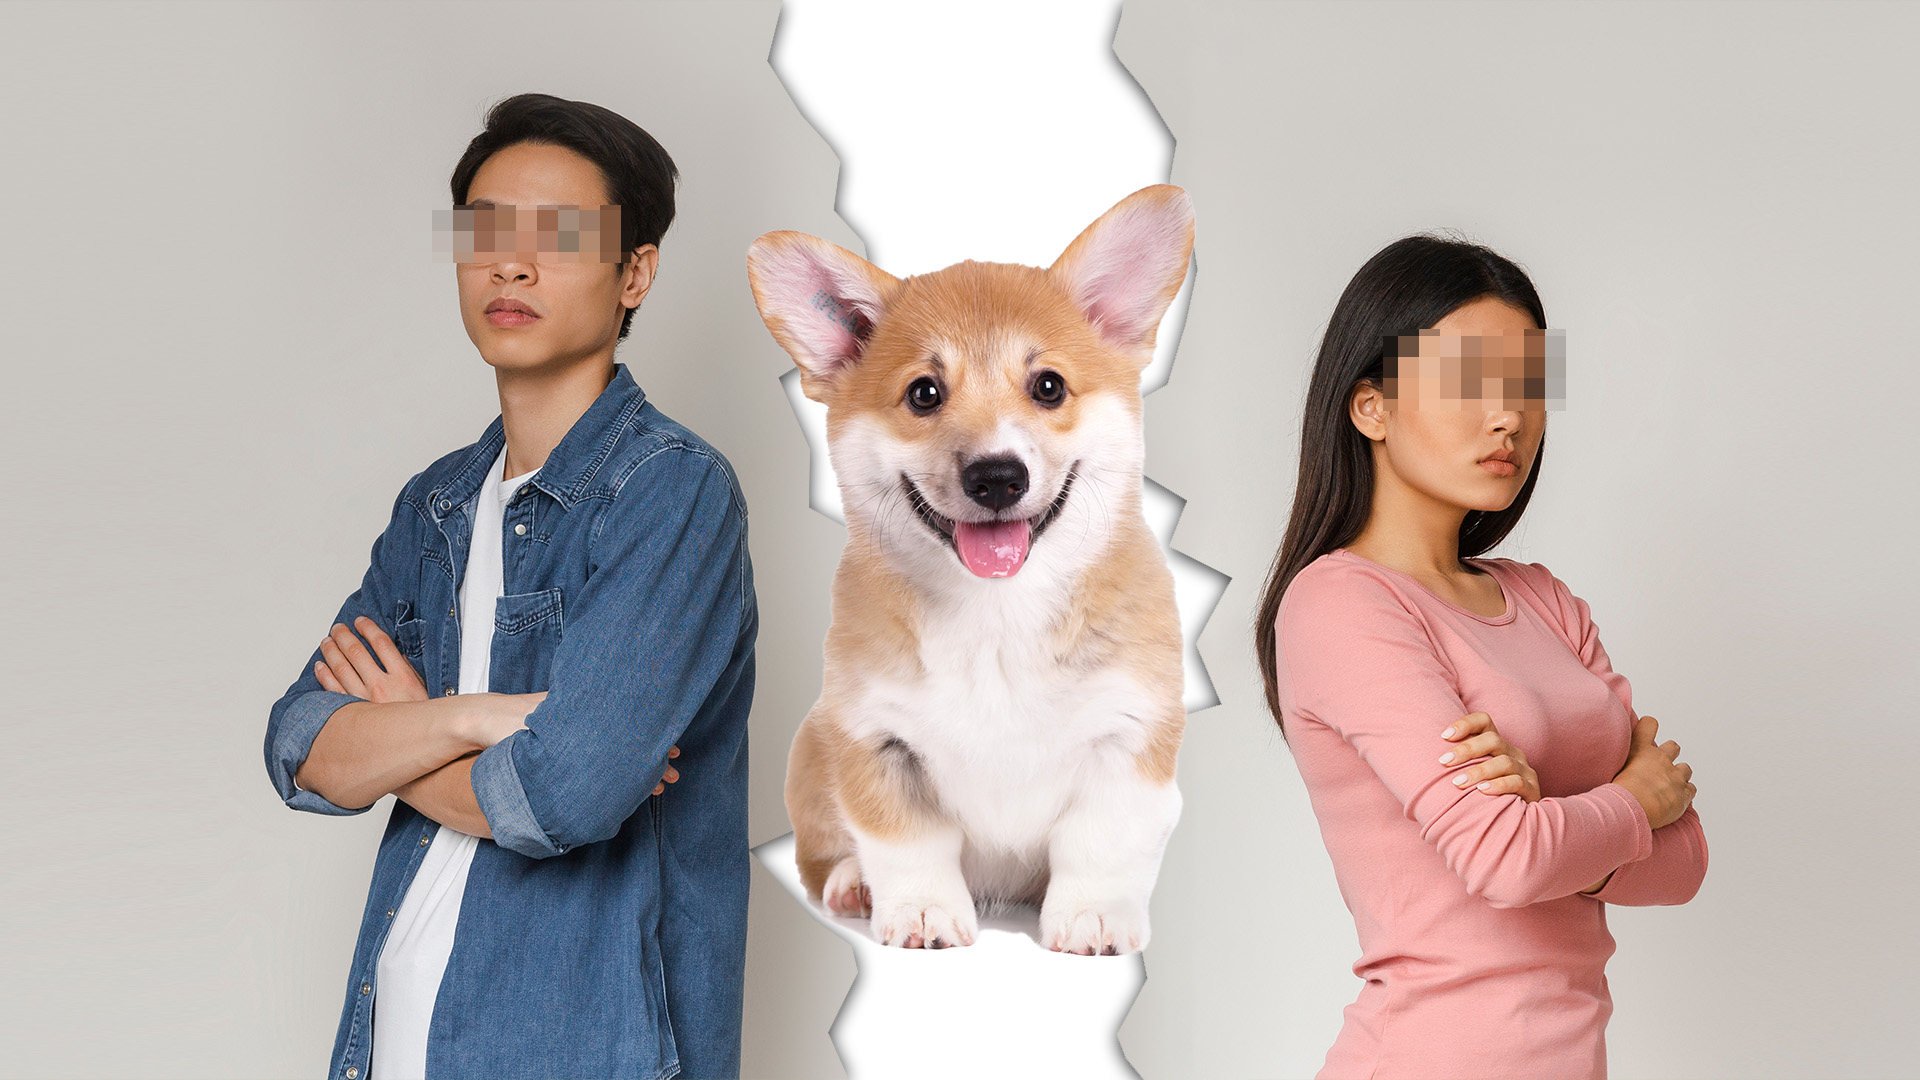 'Not without my corgi': divorce in China turns nasty after couple can't agree on custody of pet dog | South China Morning Post